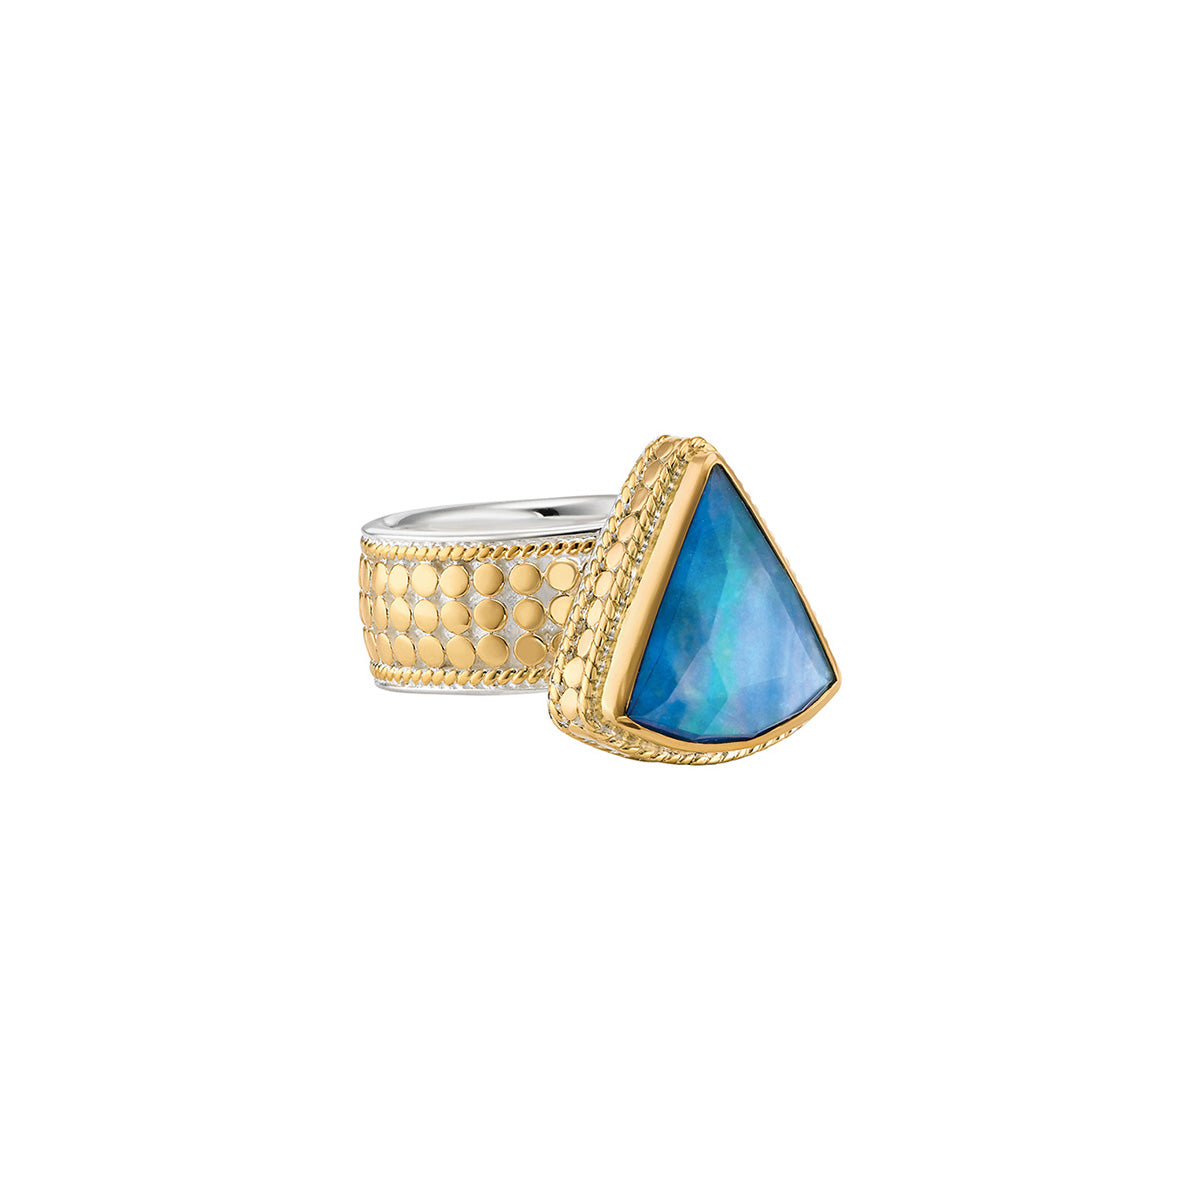 Ana Beck 18k gold plated and sterling silver Lapis Triangle Ring - Gold